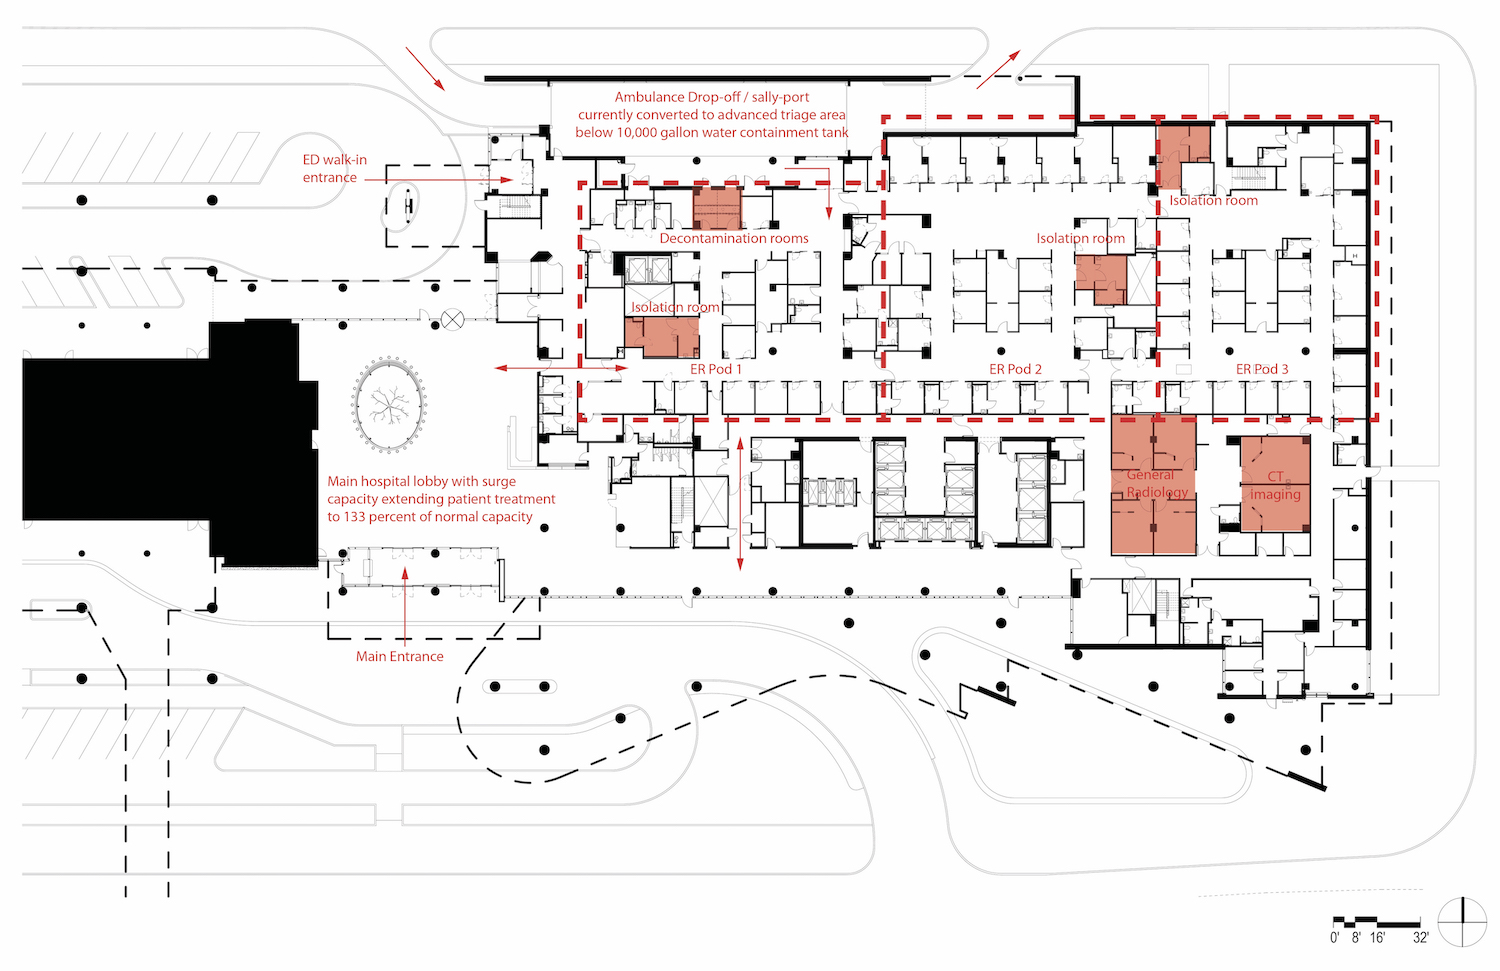 RISD North Hall floor plans and section.